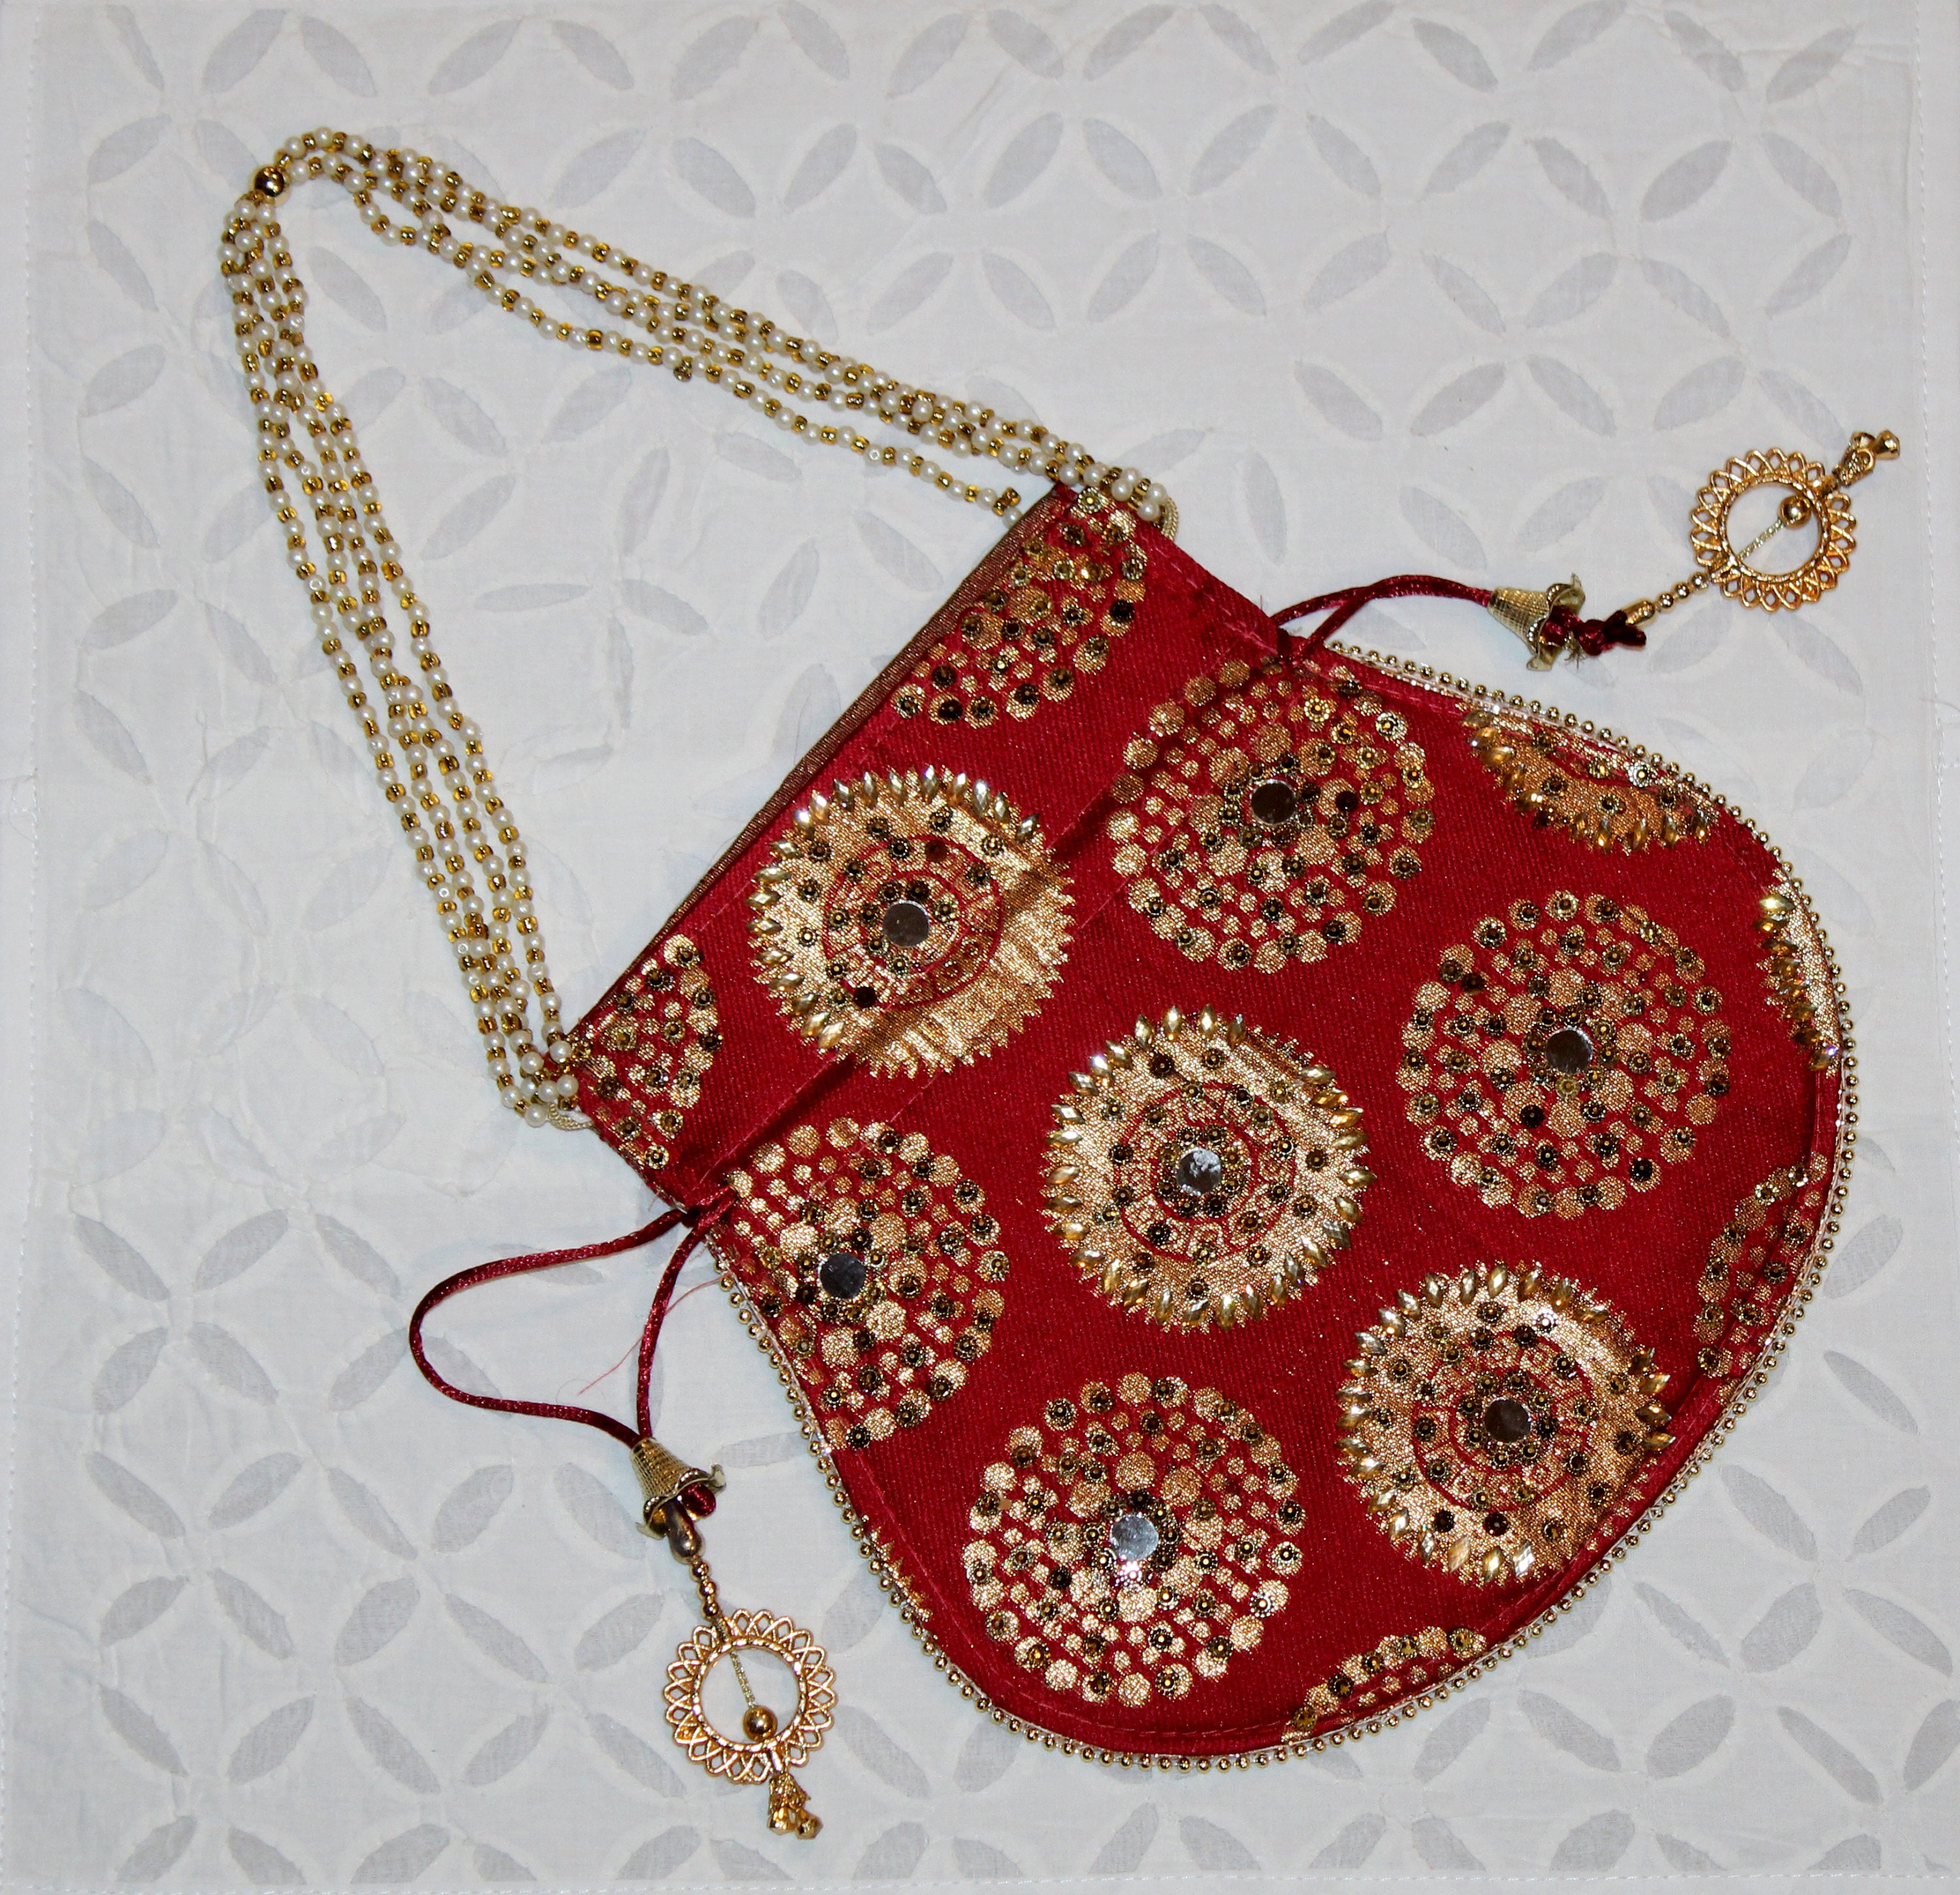 Beautiful Indian Handmade Women's Embroidered Clutch Purse - Etsy